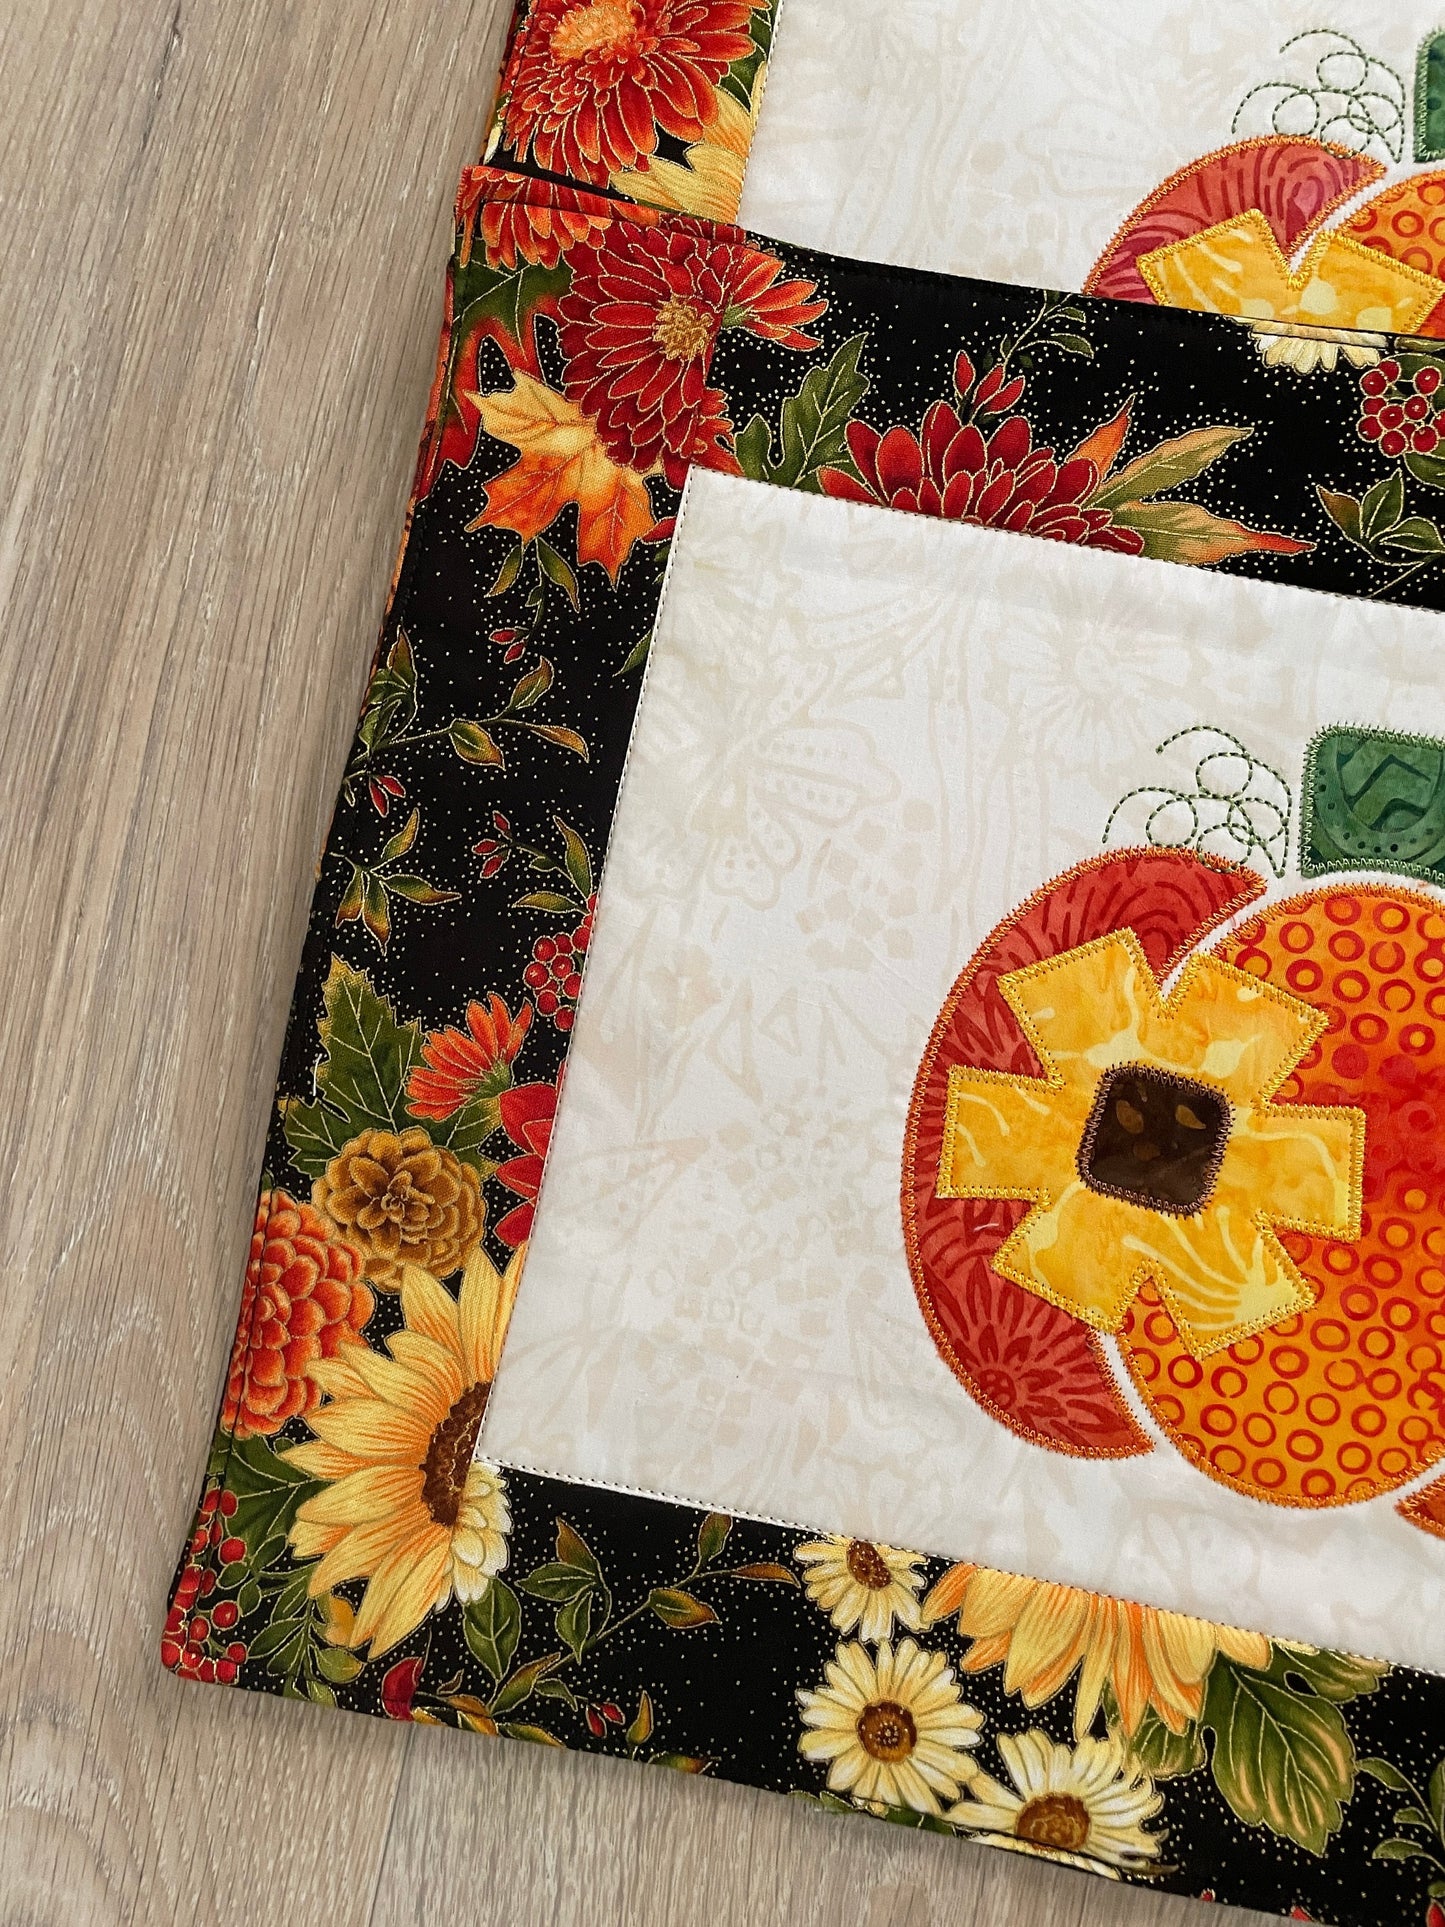 Handmade Fall Floral Pumpkin Placemats - Set of 4 - Quilted Harvest Table Decor